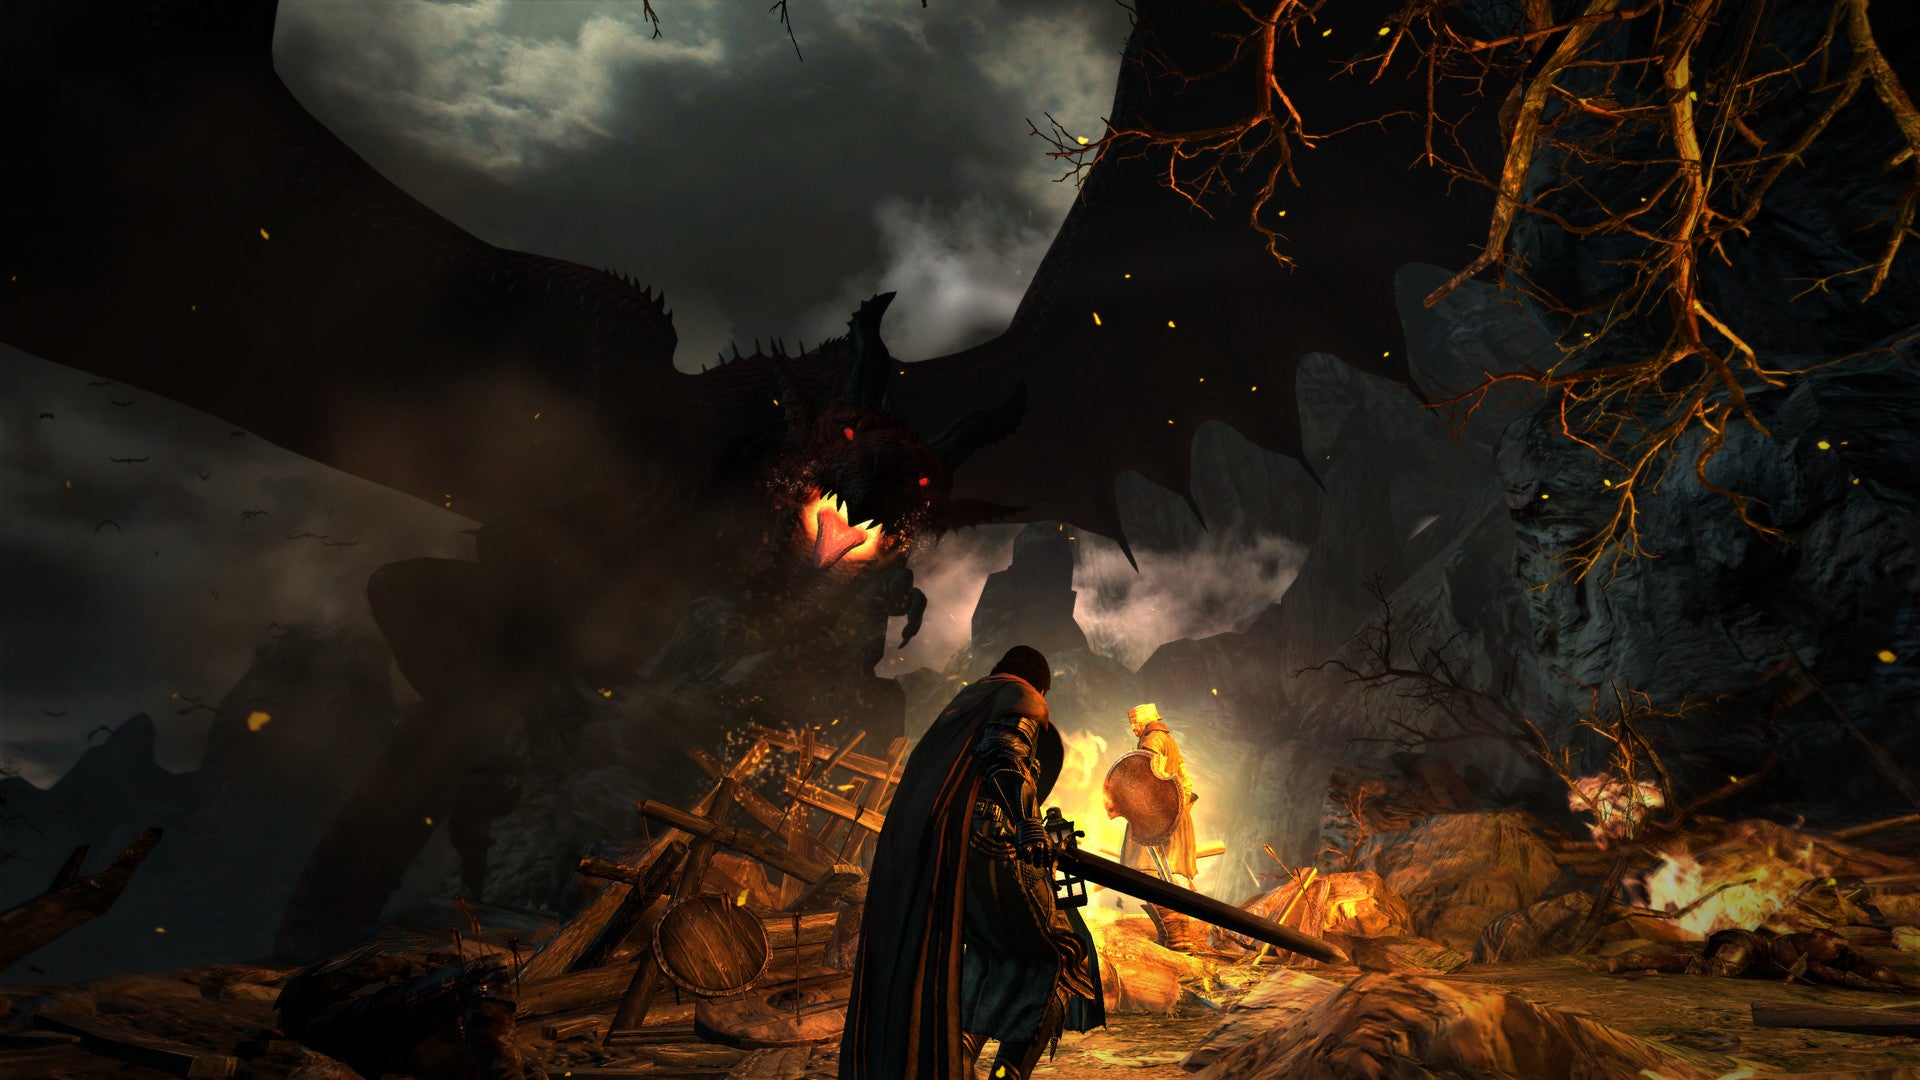 Dragon's Dogma gameplay showing a dragon and two characters.